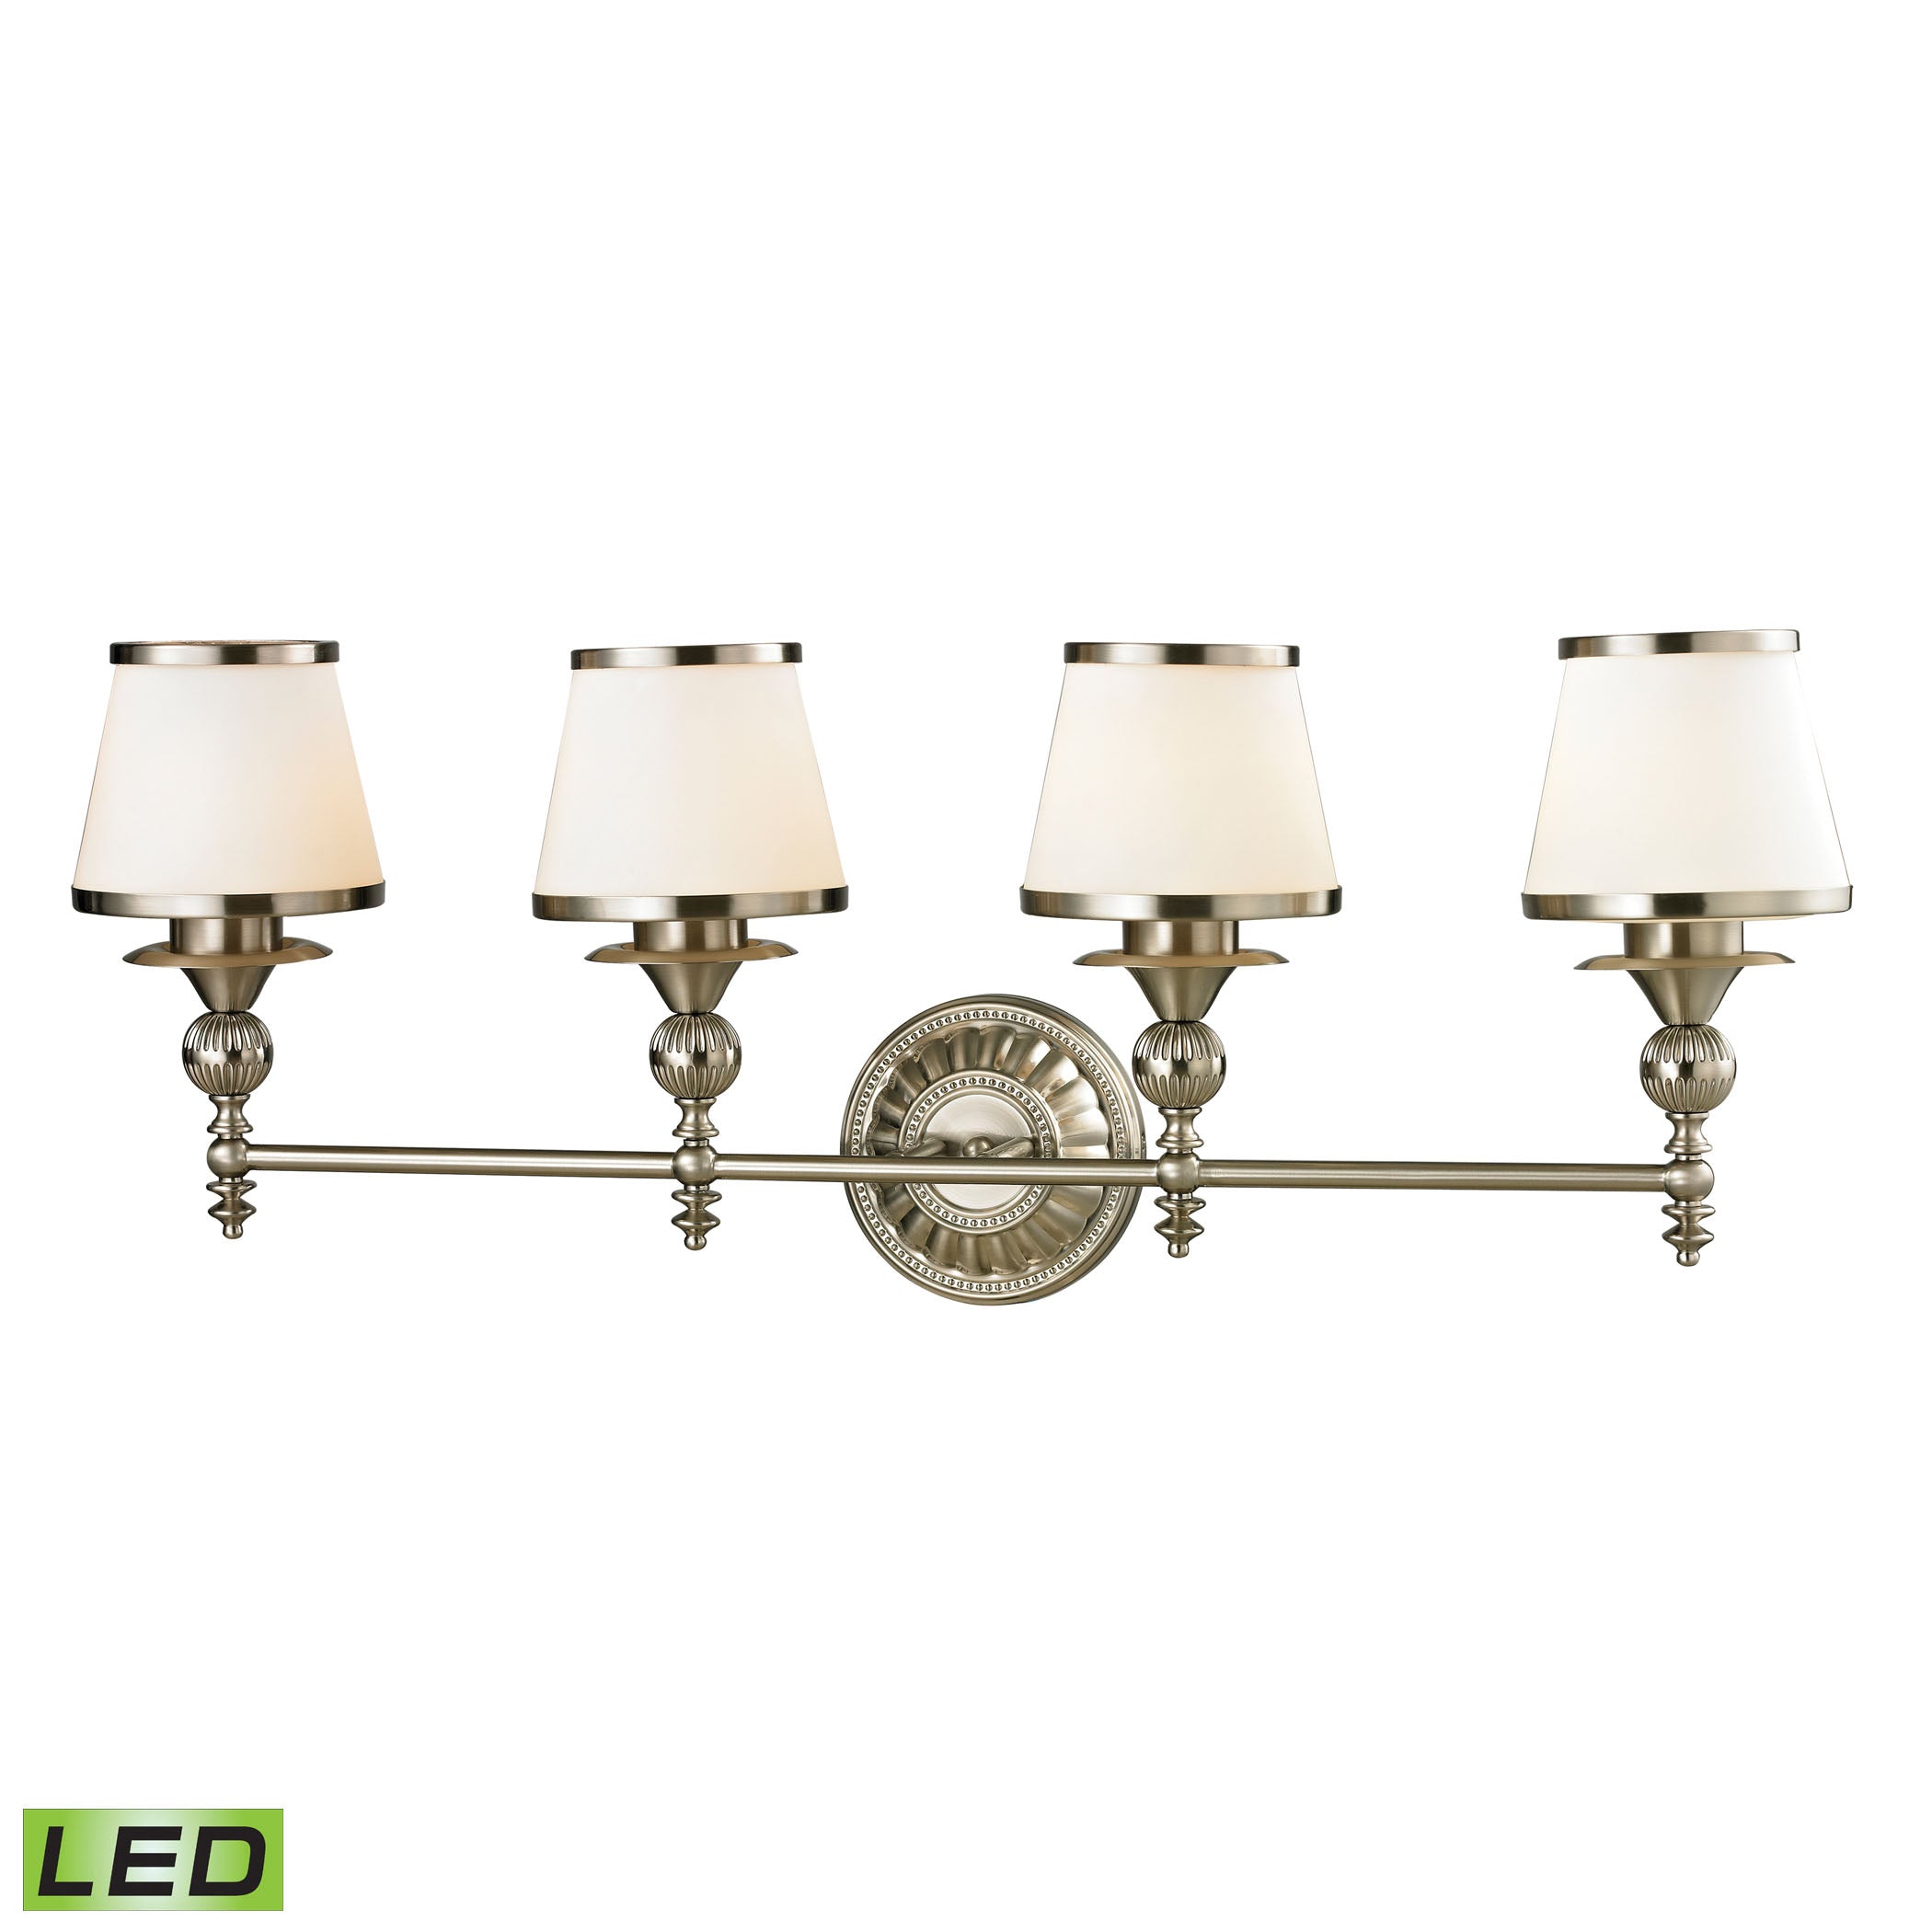 ELK Lighting 11603/4-LED Smithfield 4-Light Vanity Lamp in Brushed Nickel with Opal White Blown Glass - Includes LED Bulbs